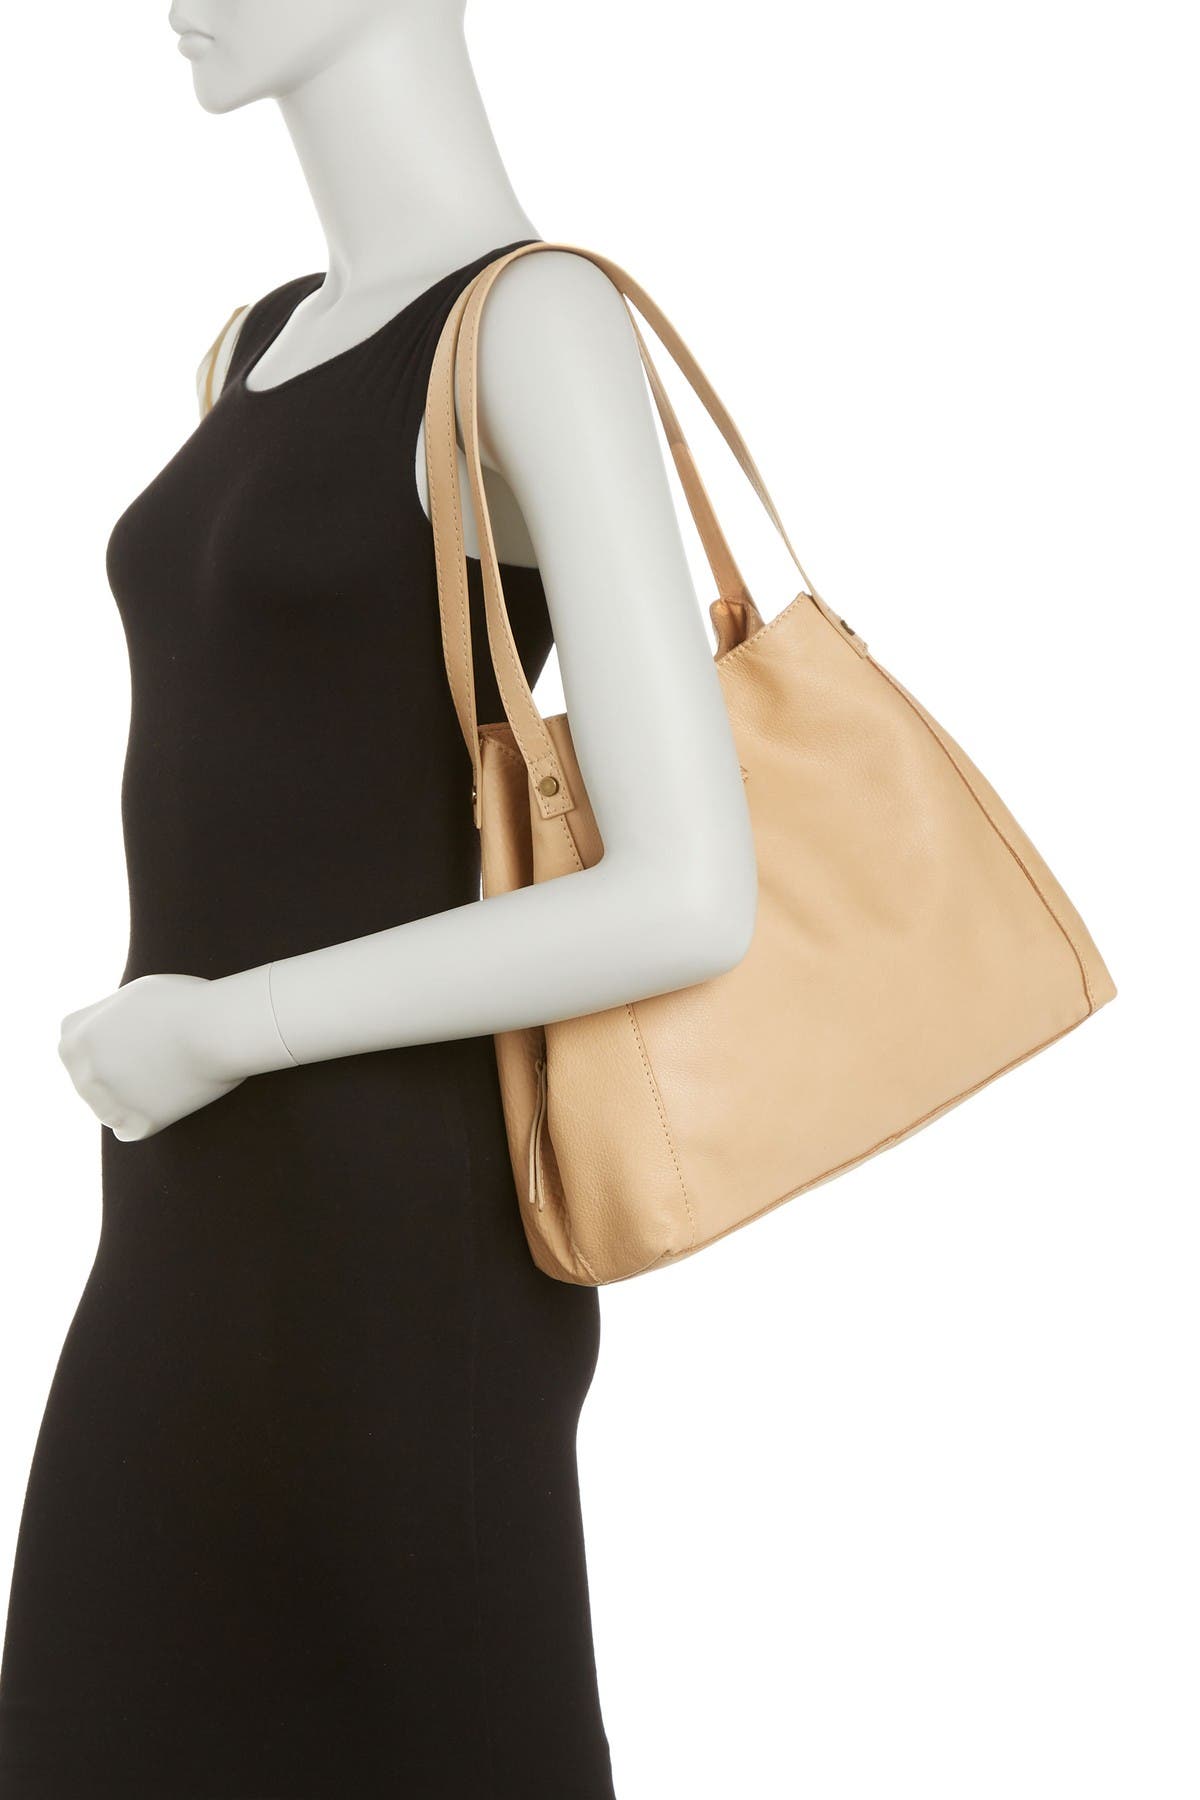 American Leather Co. Liberty Leather Shopper In Butter Rum